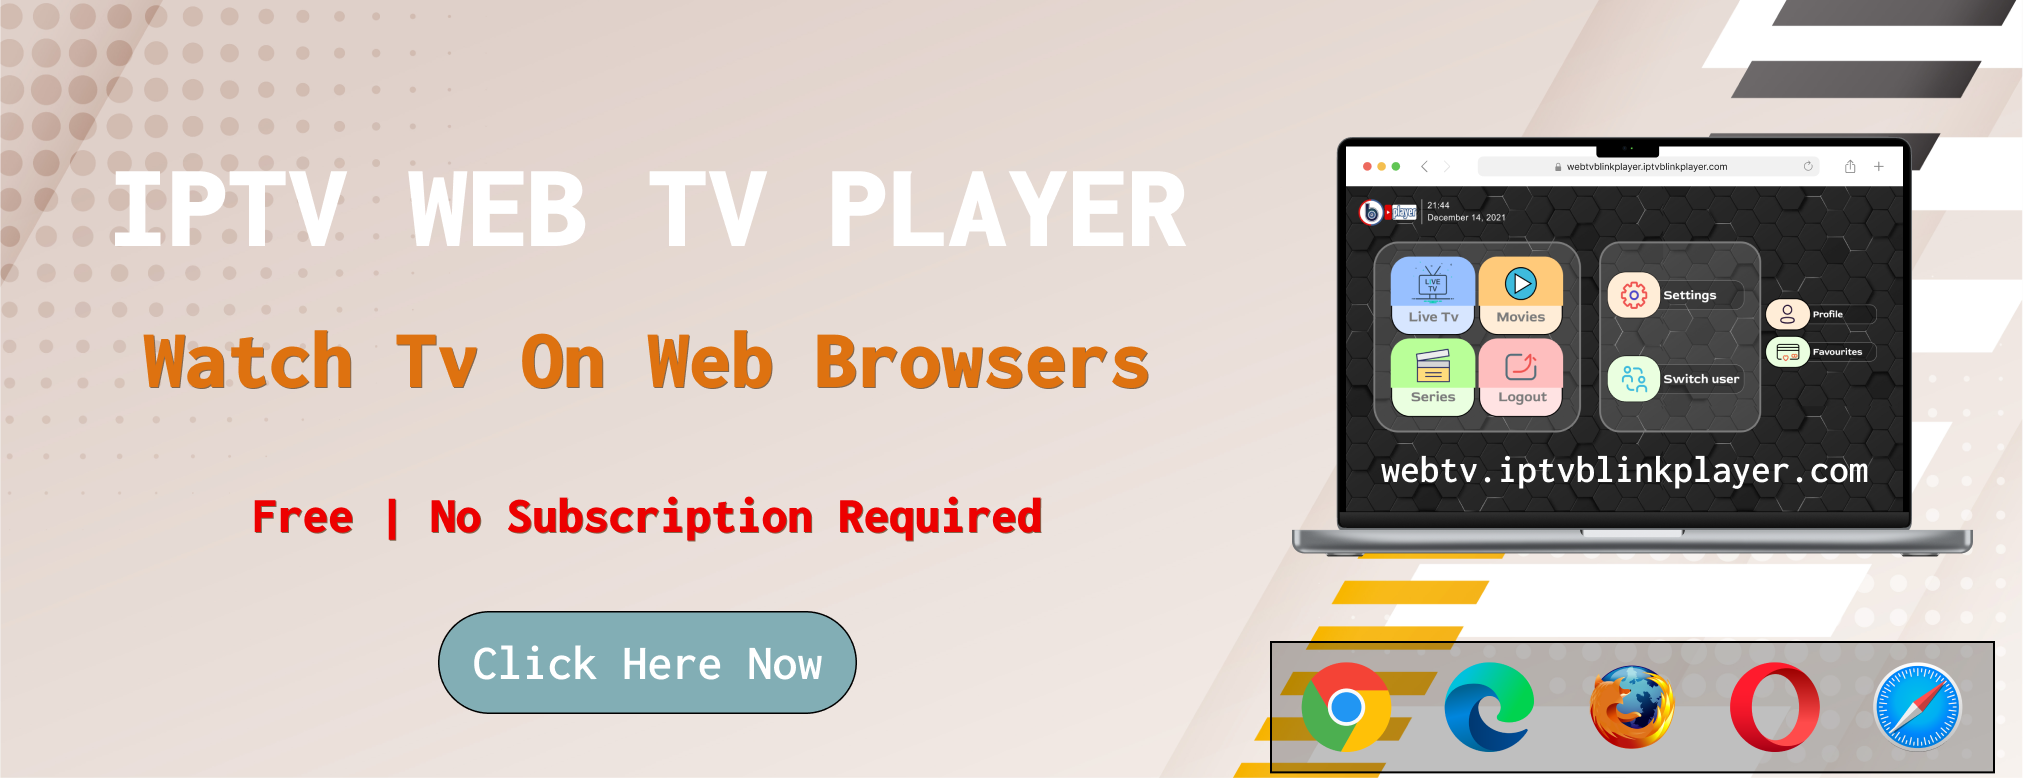 Blink Iptv Web tv player | Click Here Now